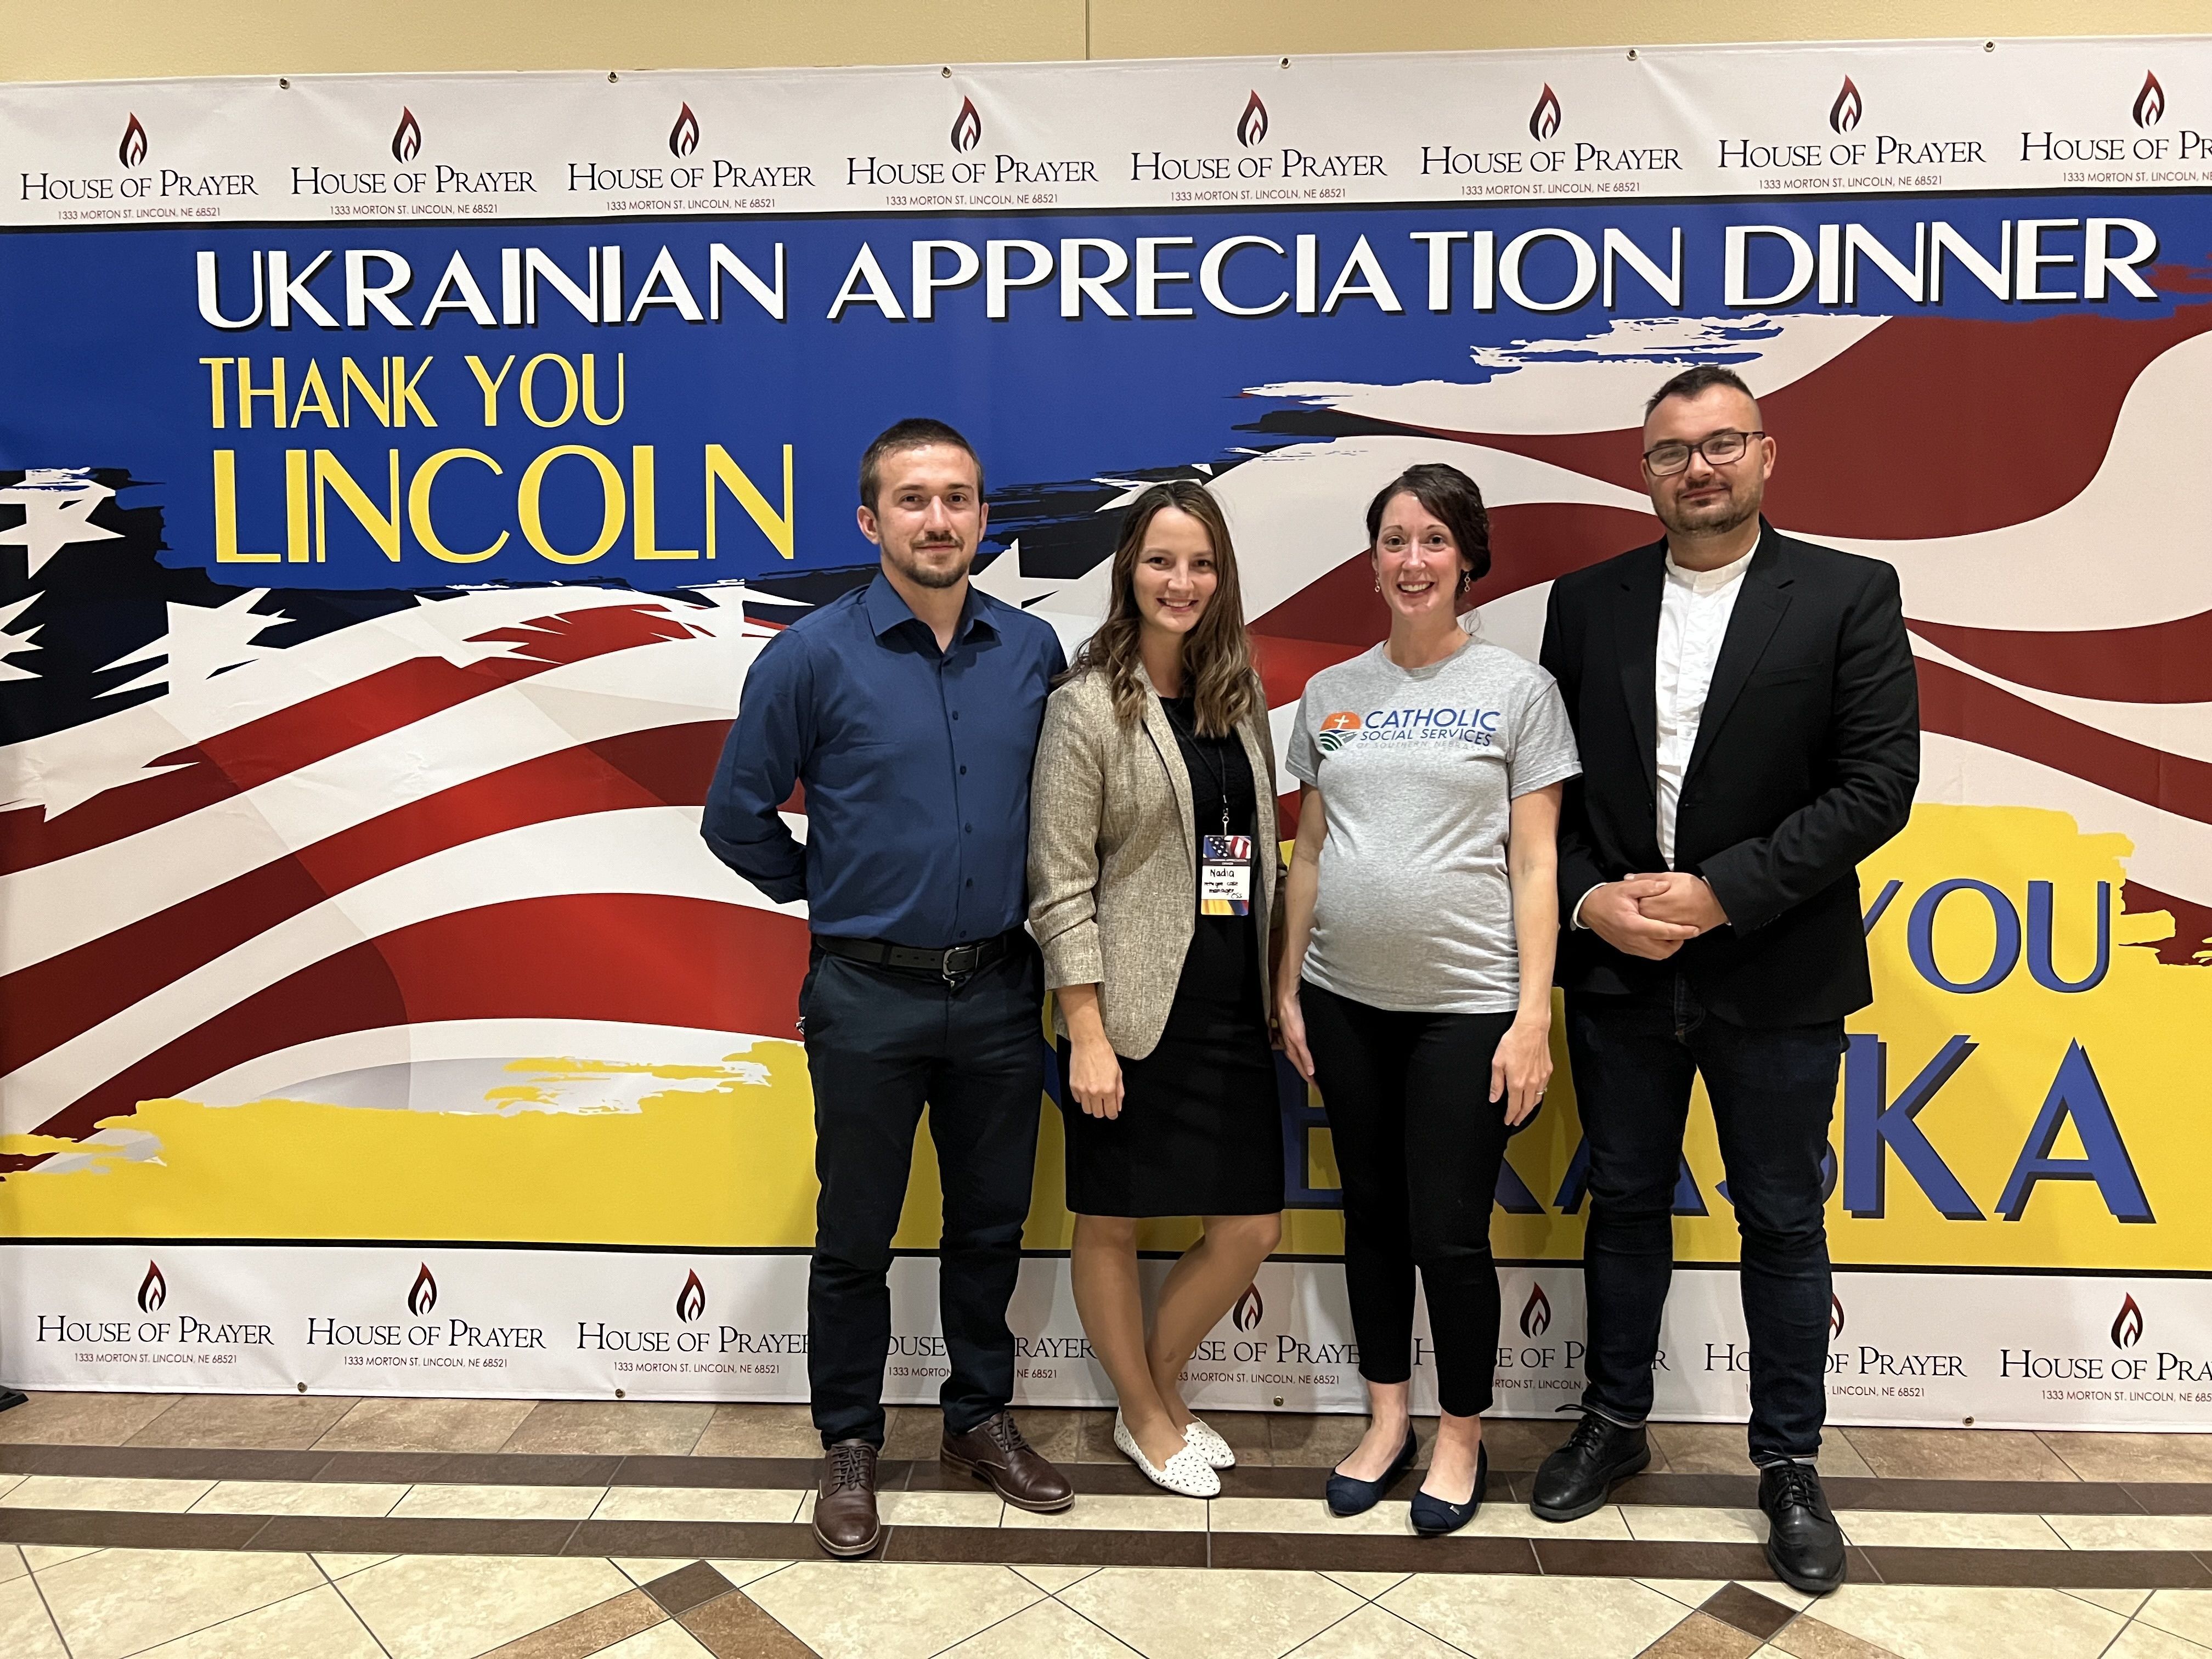 CSS and others honored for work in the Ukrainian community